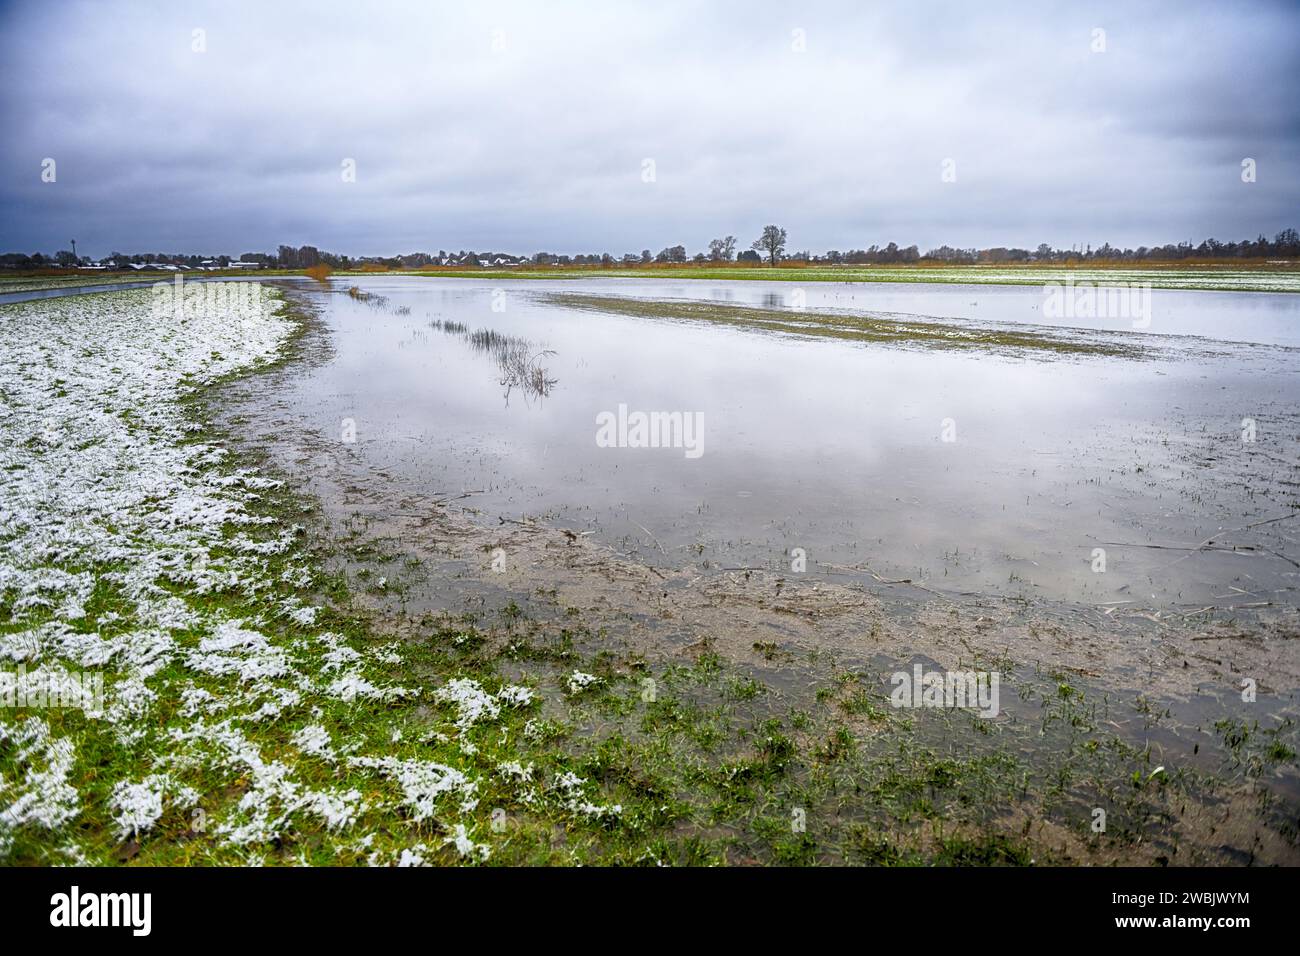 Meadows And Overflowing Drainage Ditches In Kirchwerder, Hamburg, Germany, Europe Stock Photo